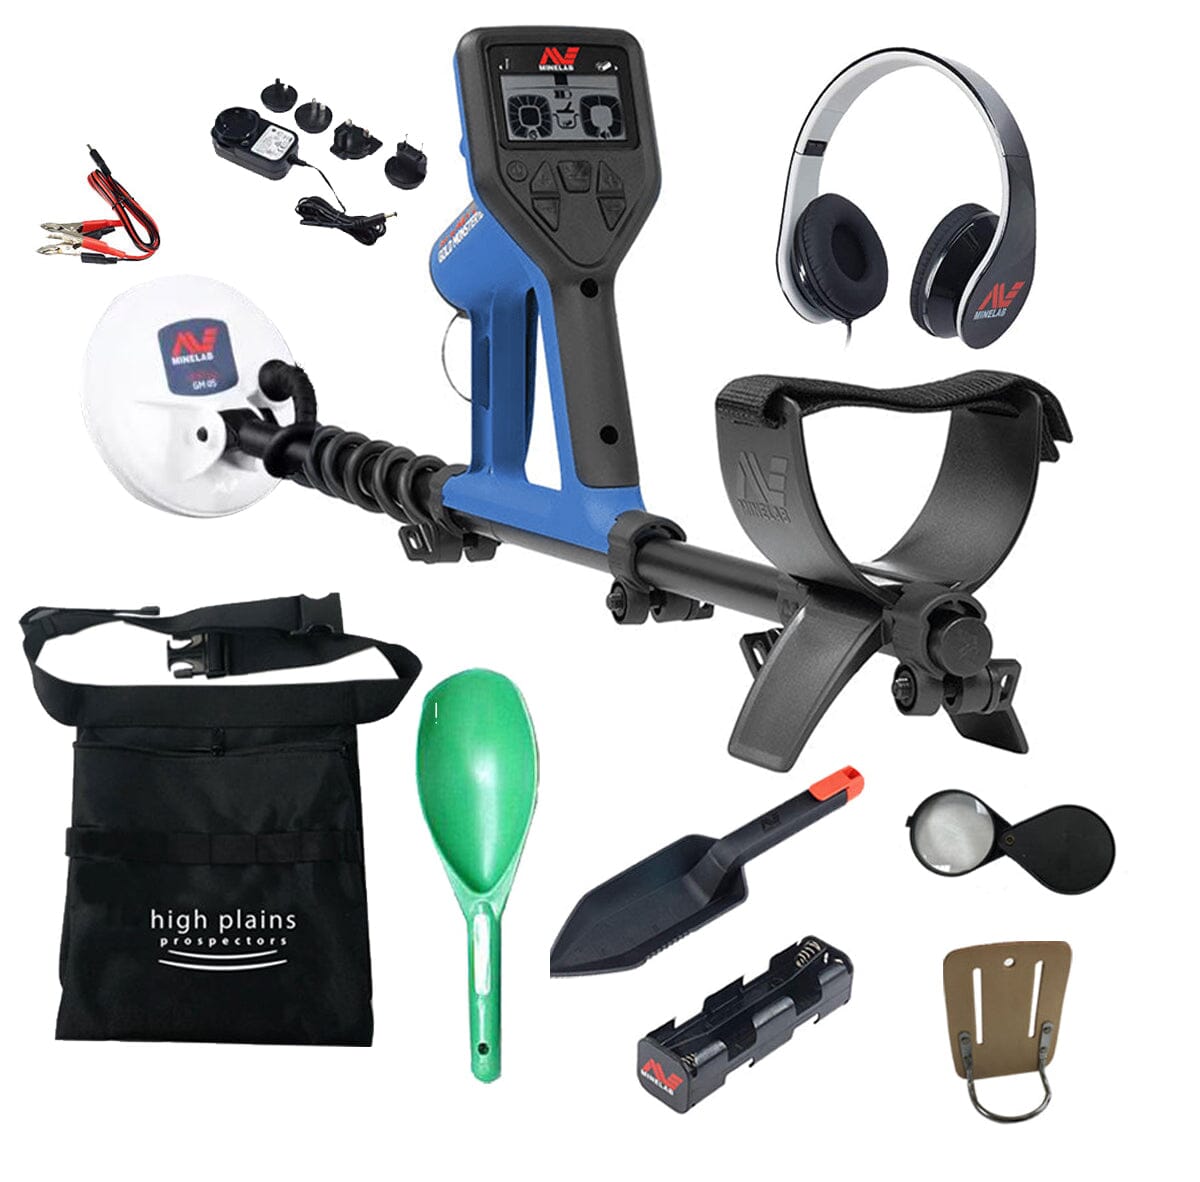 Minelab Gold Monster 1000 Metal Detector with Extra FREE Gear